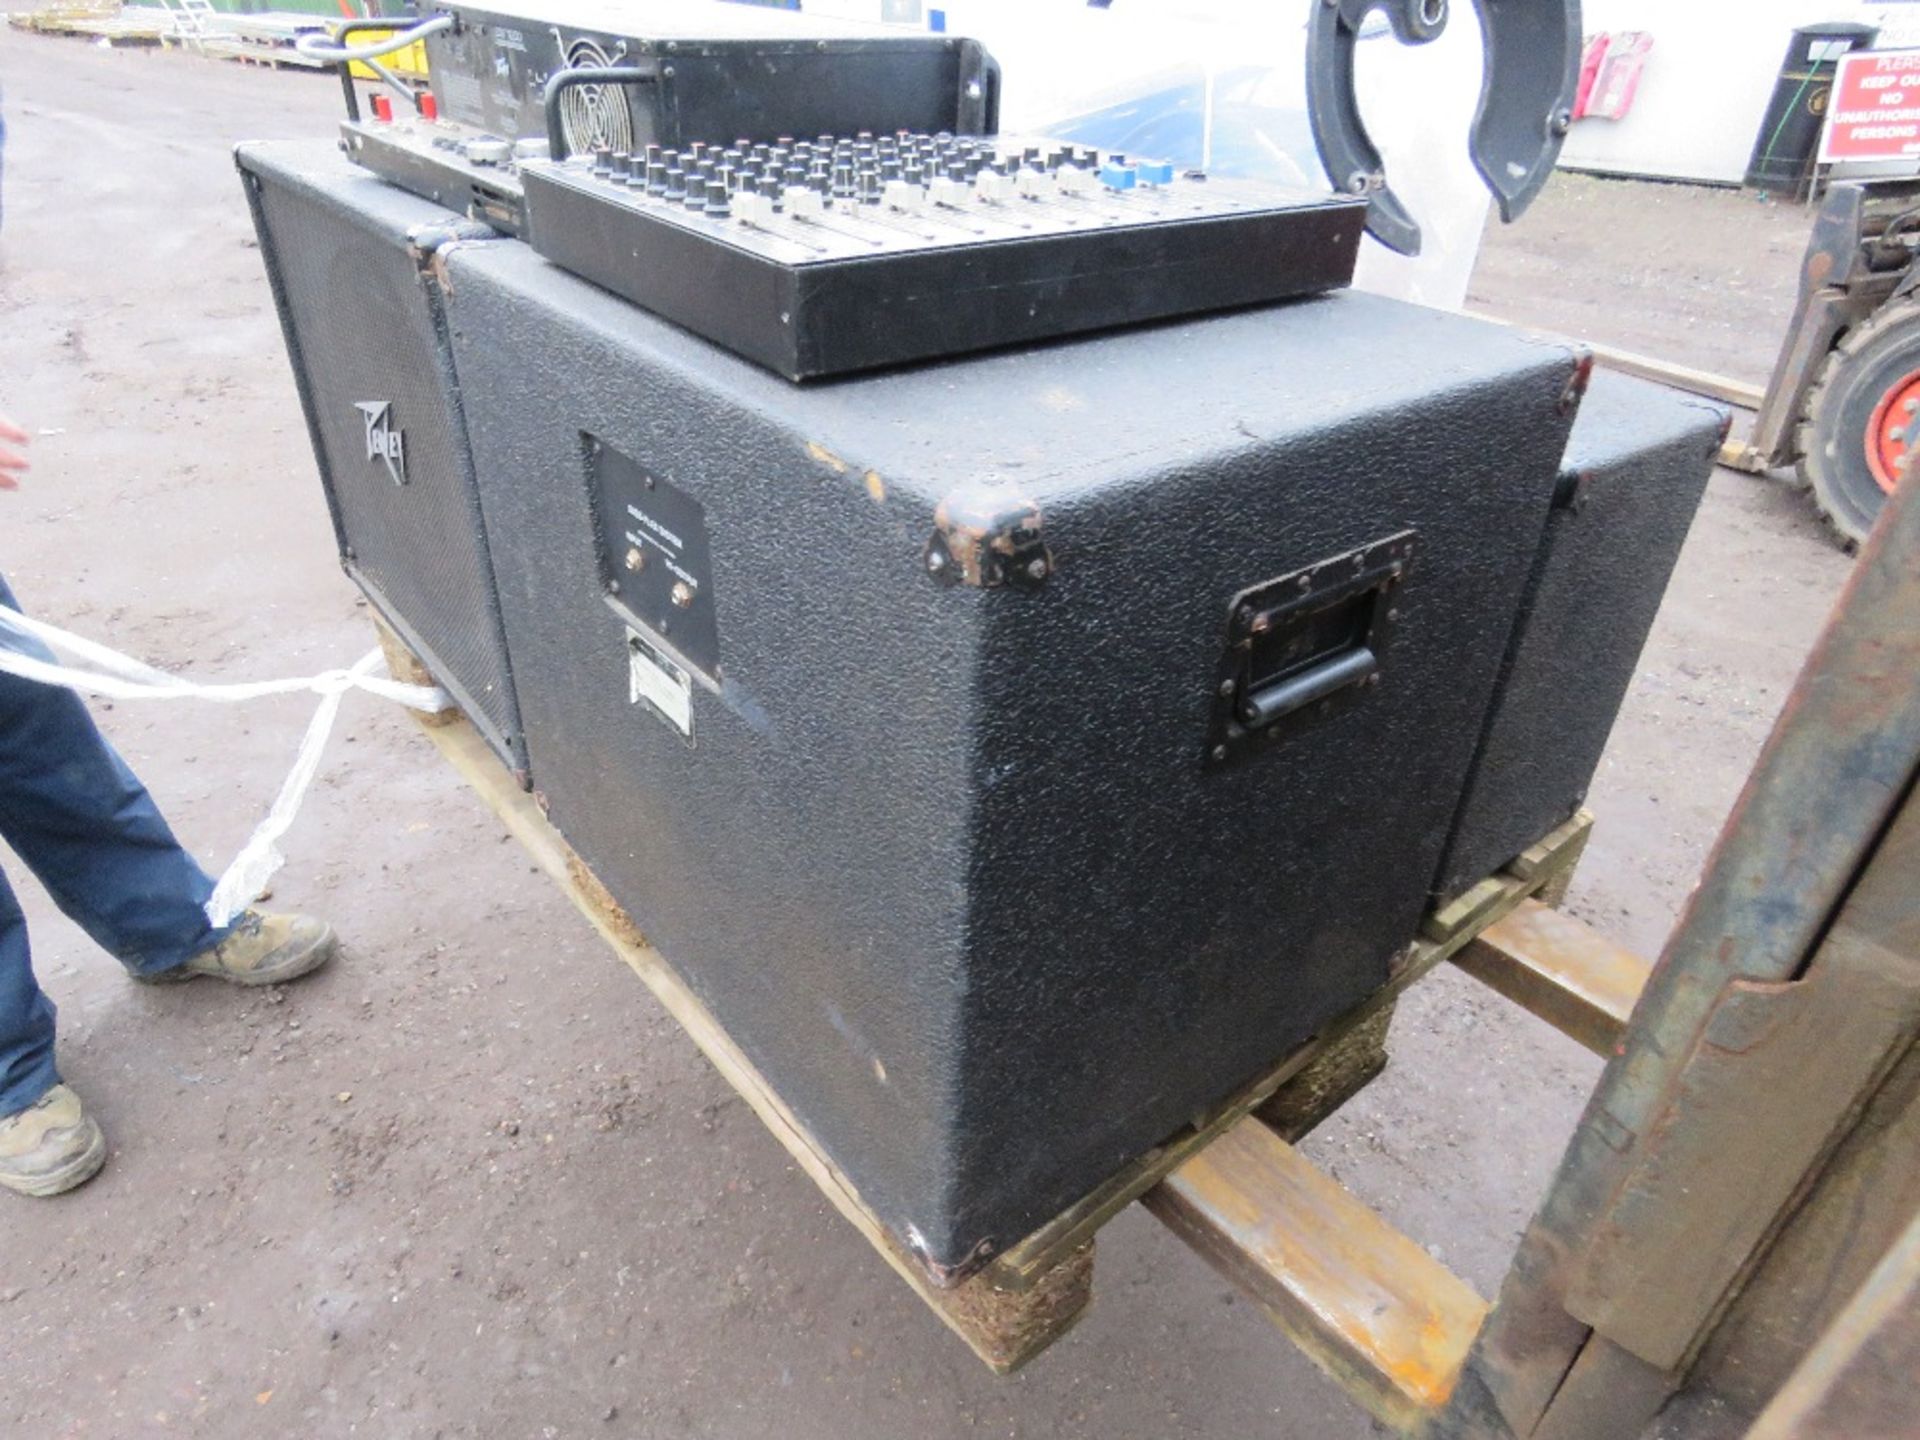 PUBLIC ADDRESS SYSTEM WITH 2 X MICROPHONES, CABLE, 4 X SPEAKERS AND A MIXER DECK. - Image 11 of 12